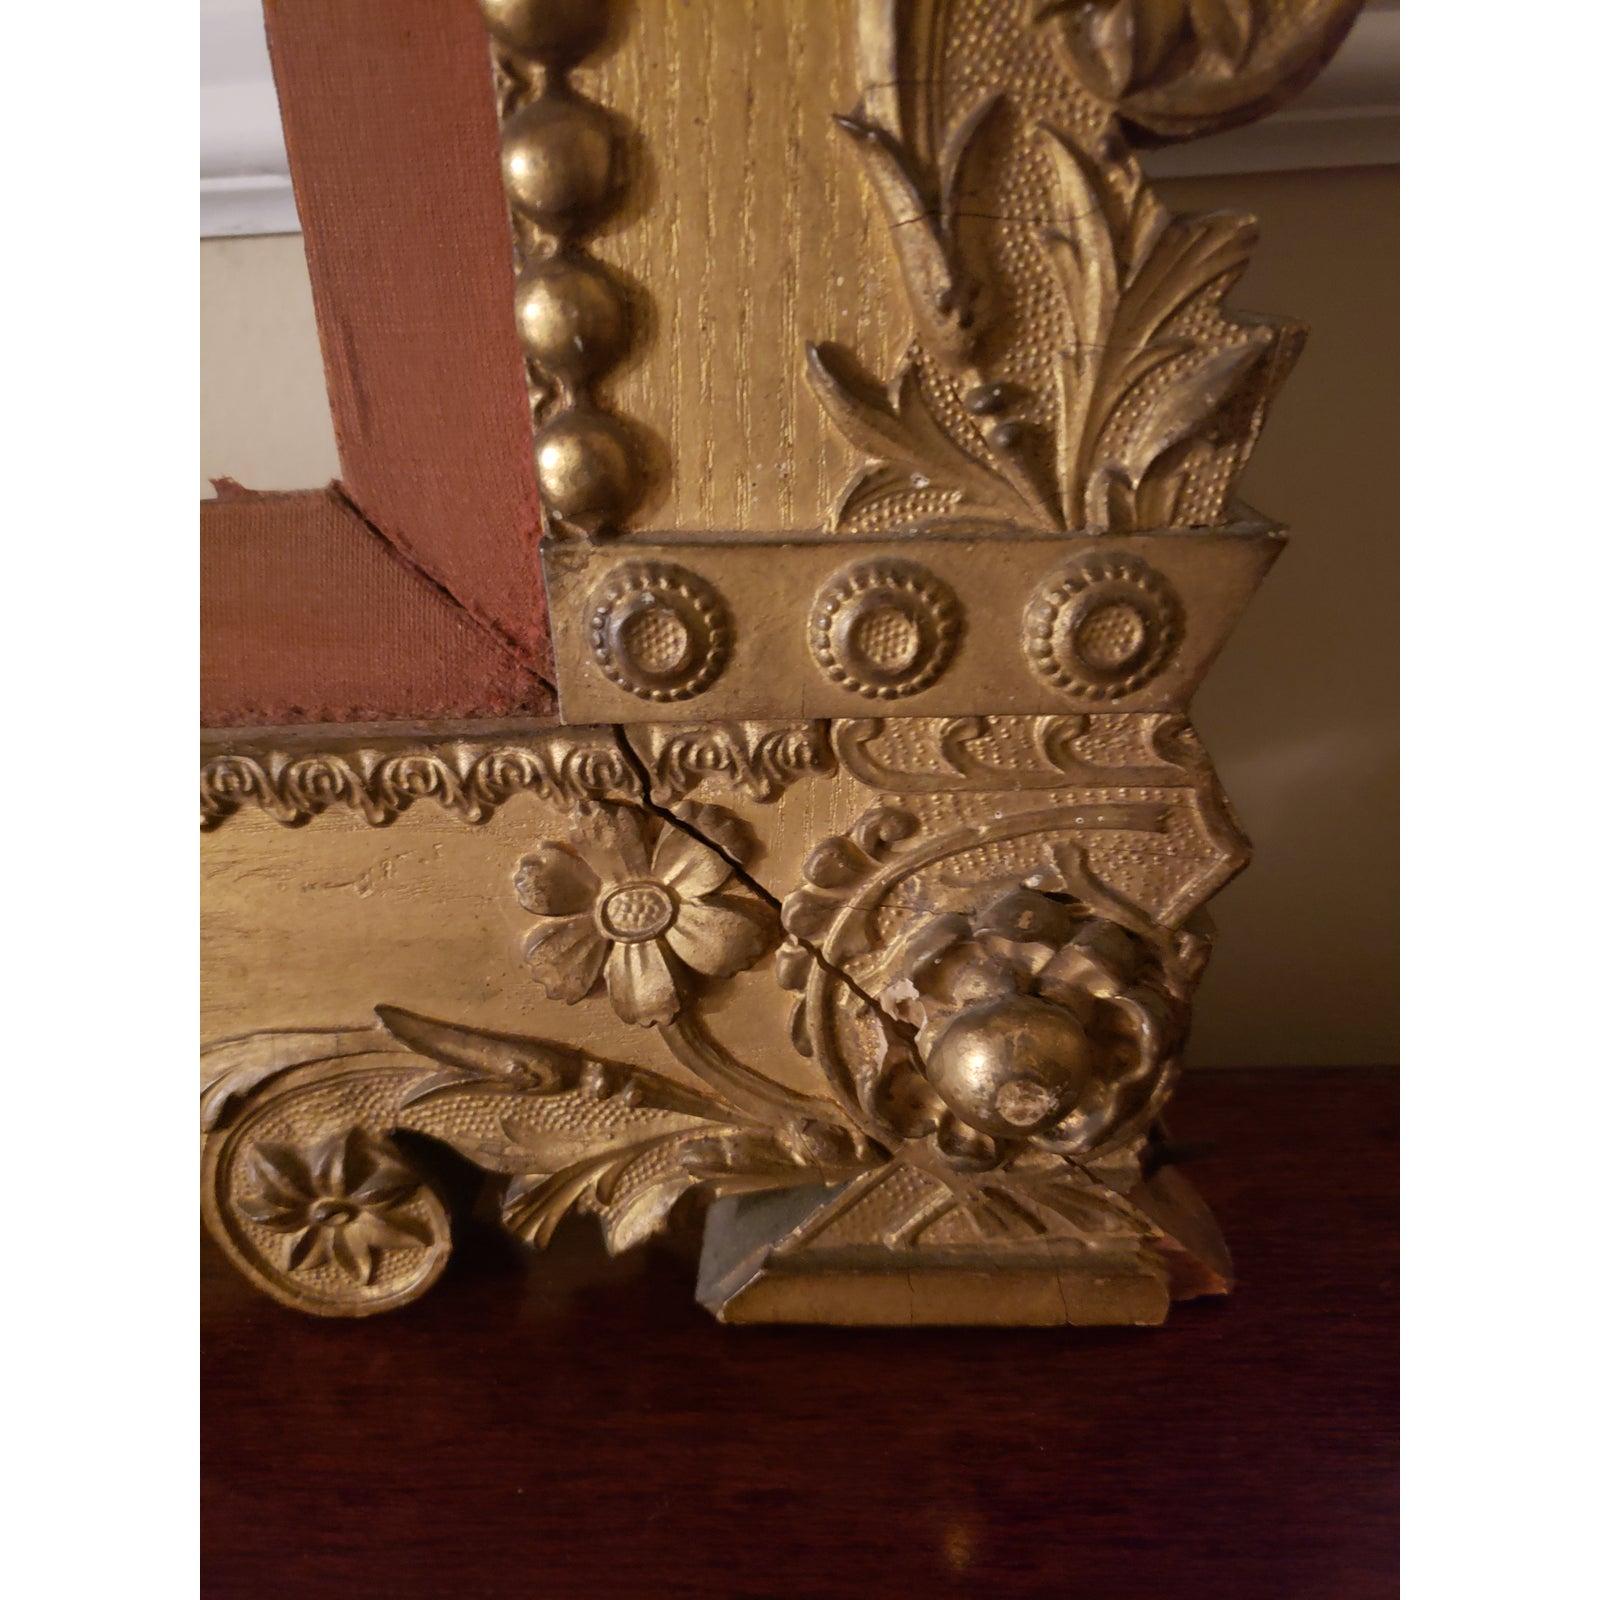 19th Century 1800s Edward Klauber Wood and Ormolu Ornate Picture Frame For Sale